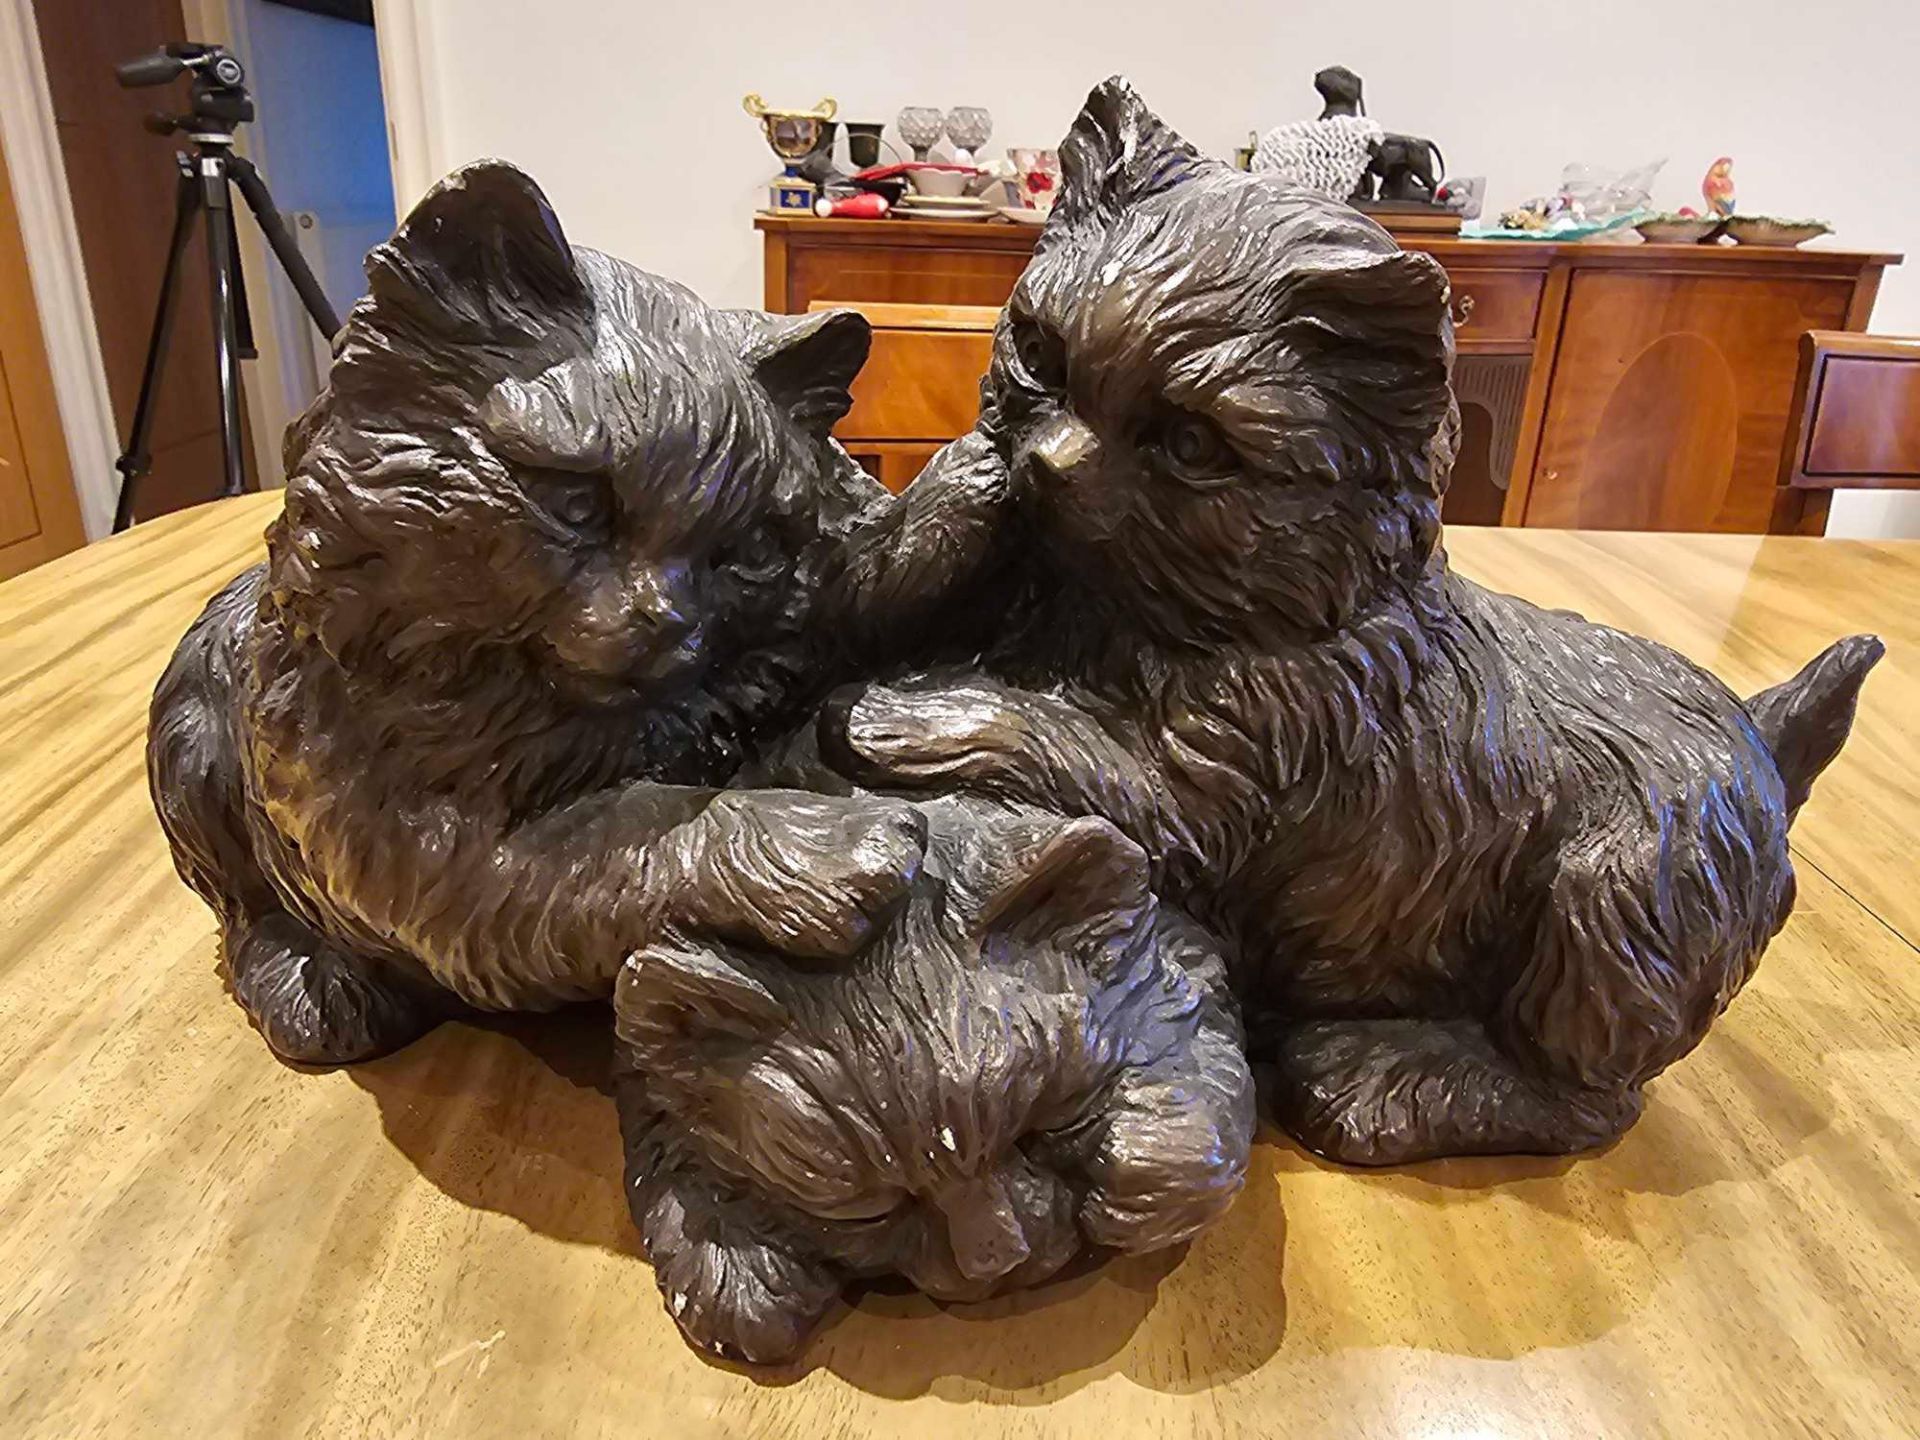 A Resin Figurine Of A Trio Of Kittens